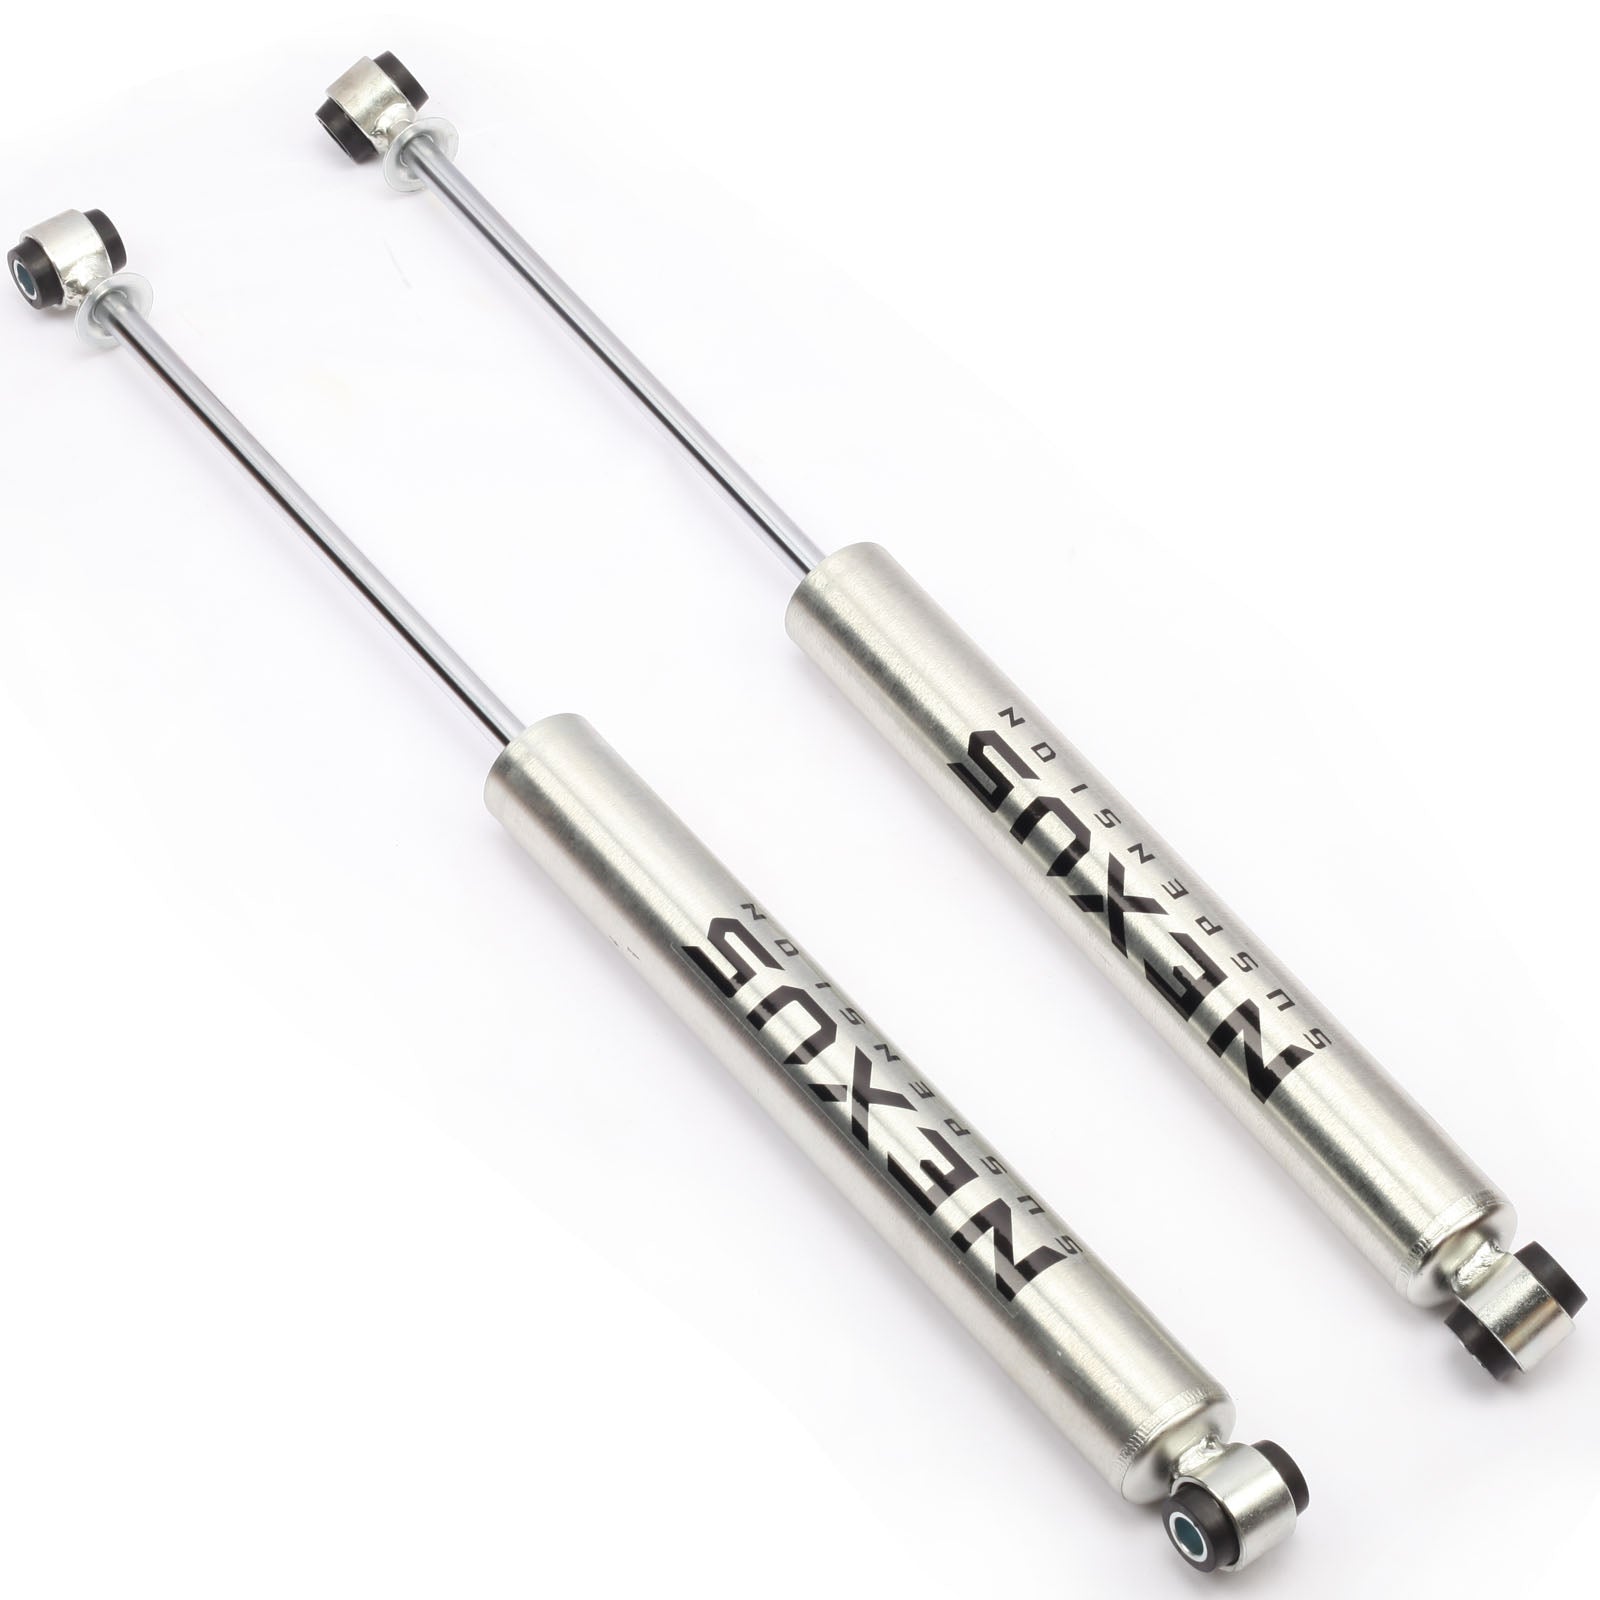 NEXUS SUSPENSION 5Inch Lift Rear Shock Absorber for 2001-2006 Chevrolet Suburban 2500,Zinc Plated Coating,Pair Pack